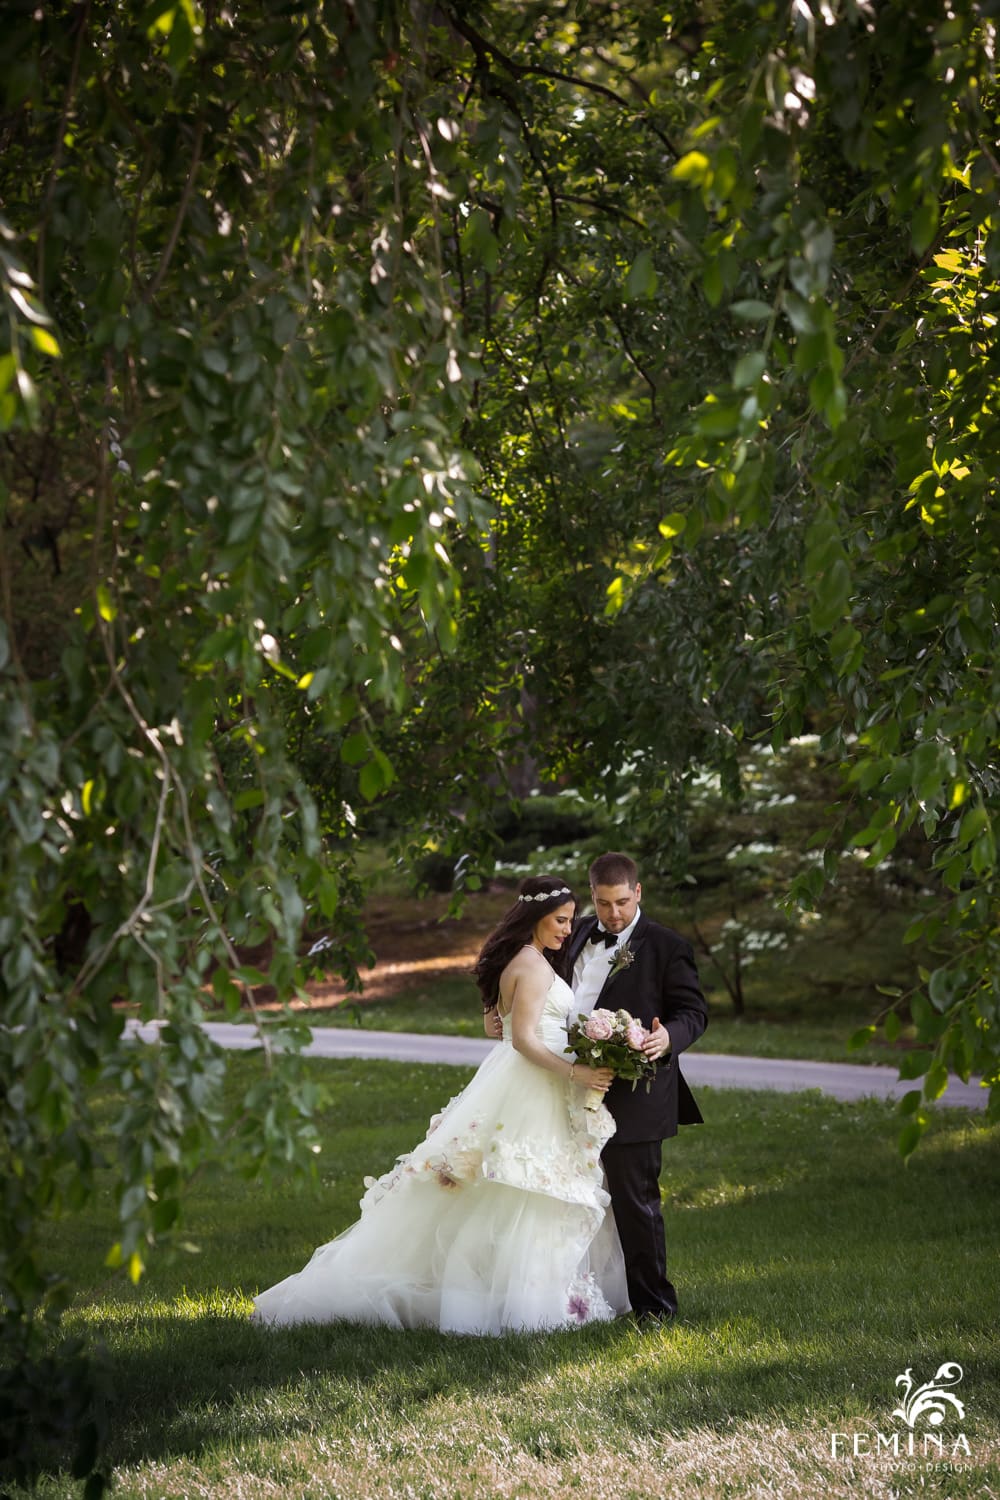 Danielle and Johnny in the Botanical Garden Photo